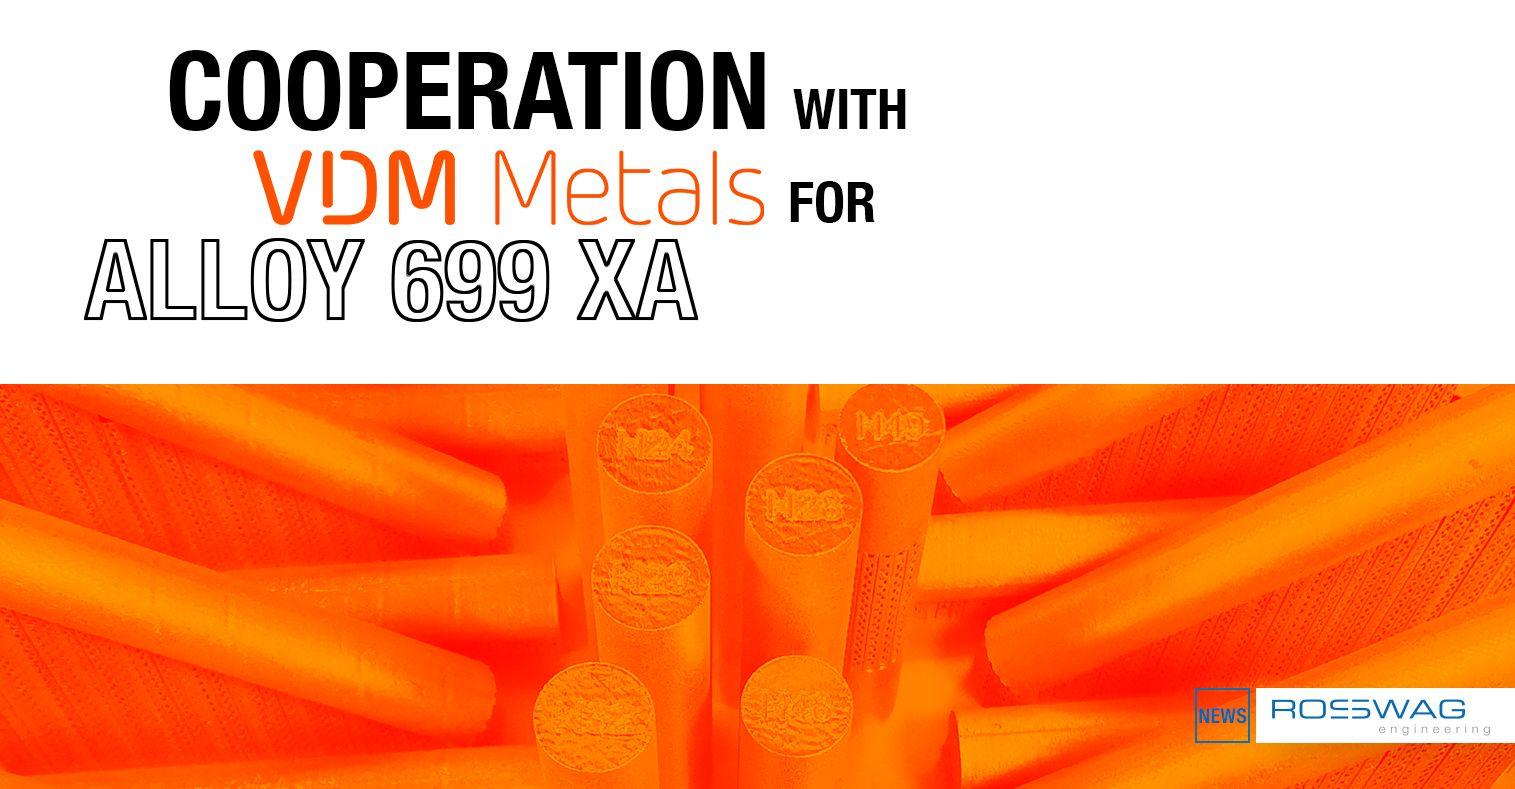 Cooperation with VDM Metals for Alloy 699 XA